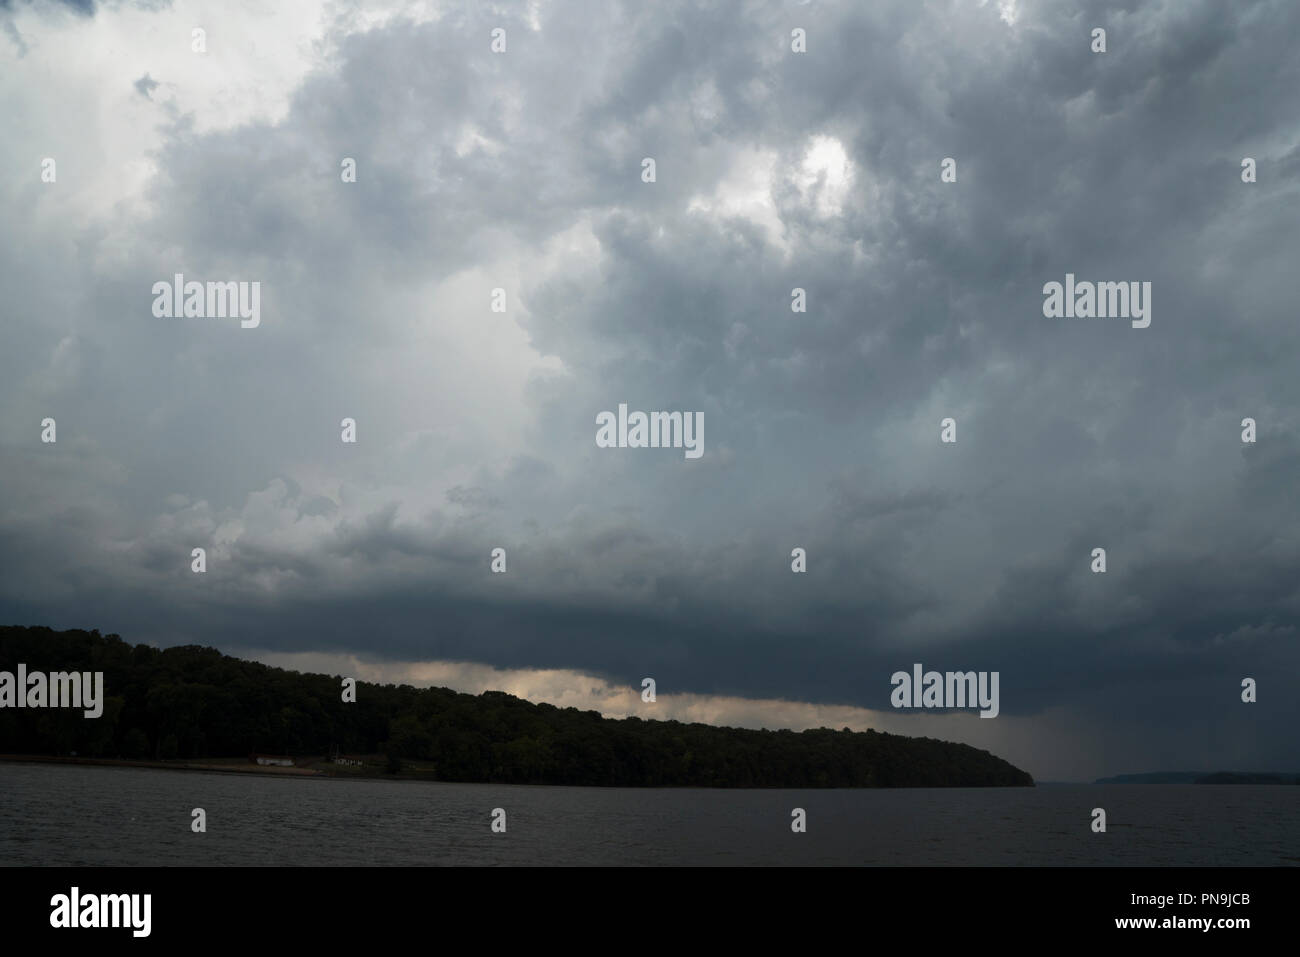 On a September afternoon, a storm bringing rain, thunder and lightning filled the sky over the Hudson River just south of the town of Hudson, New York. Stock Photo